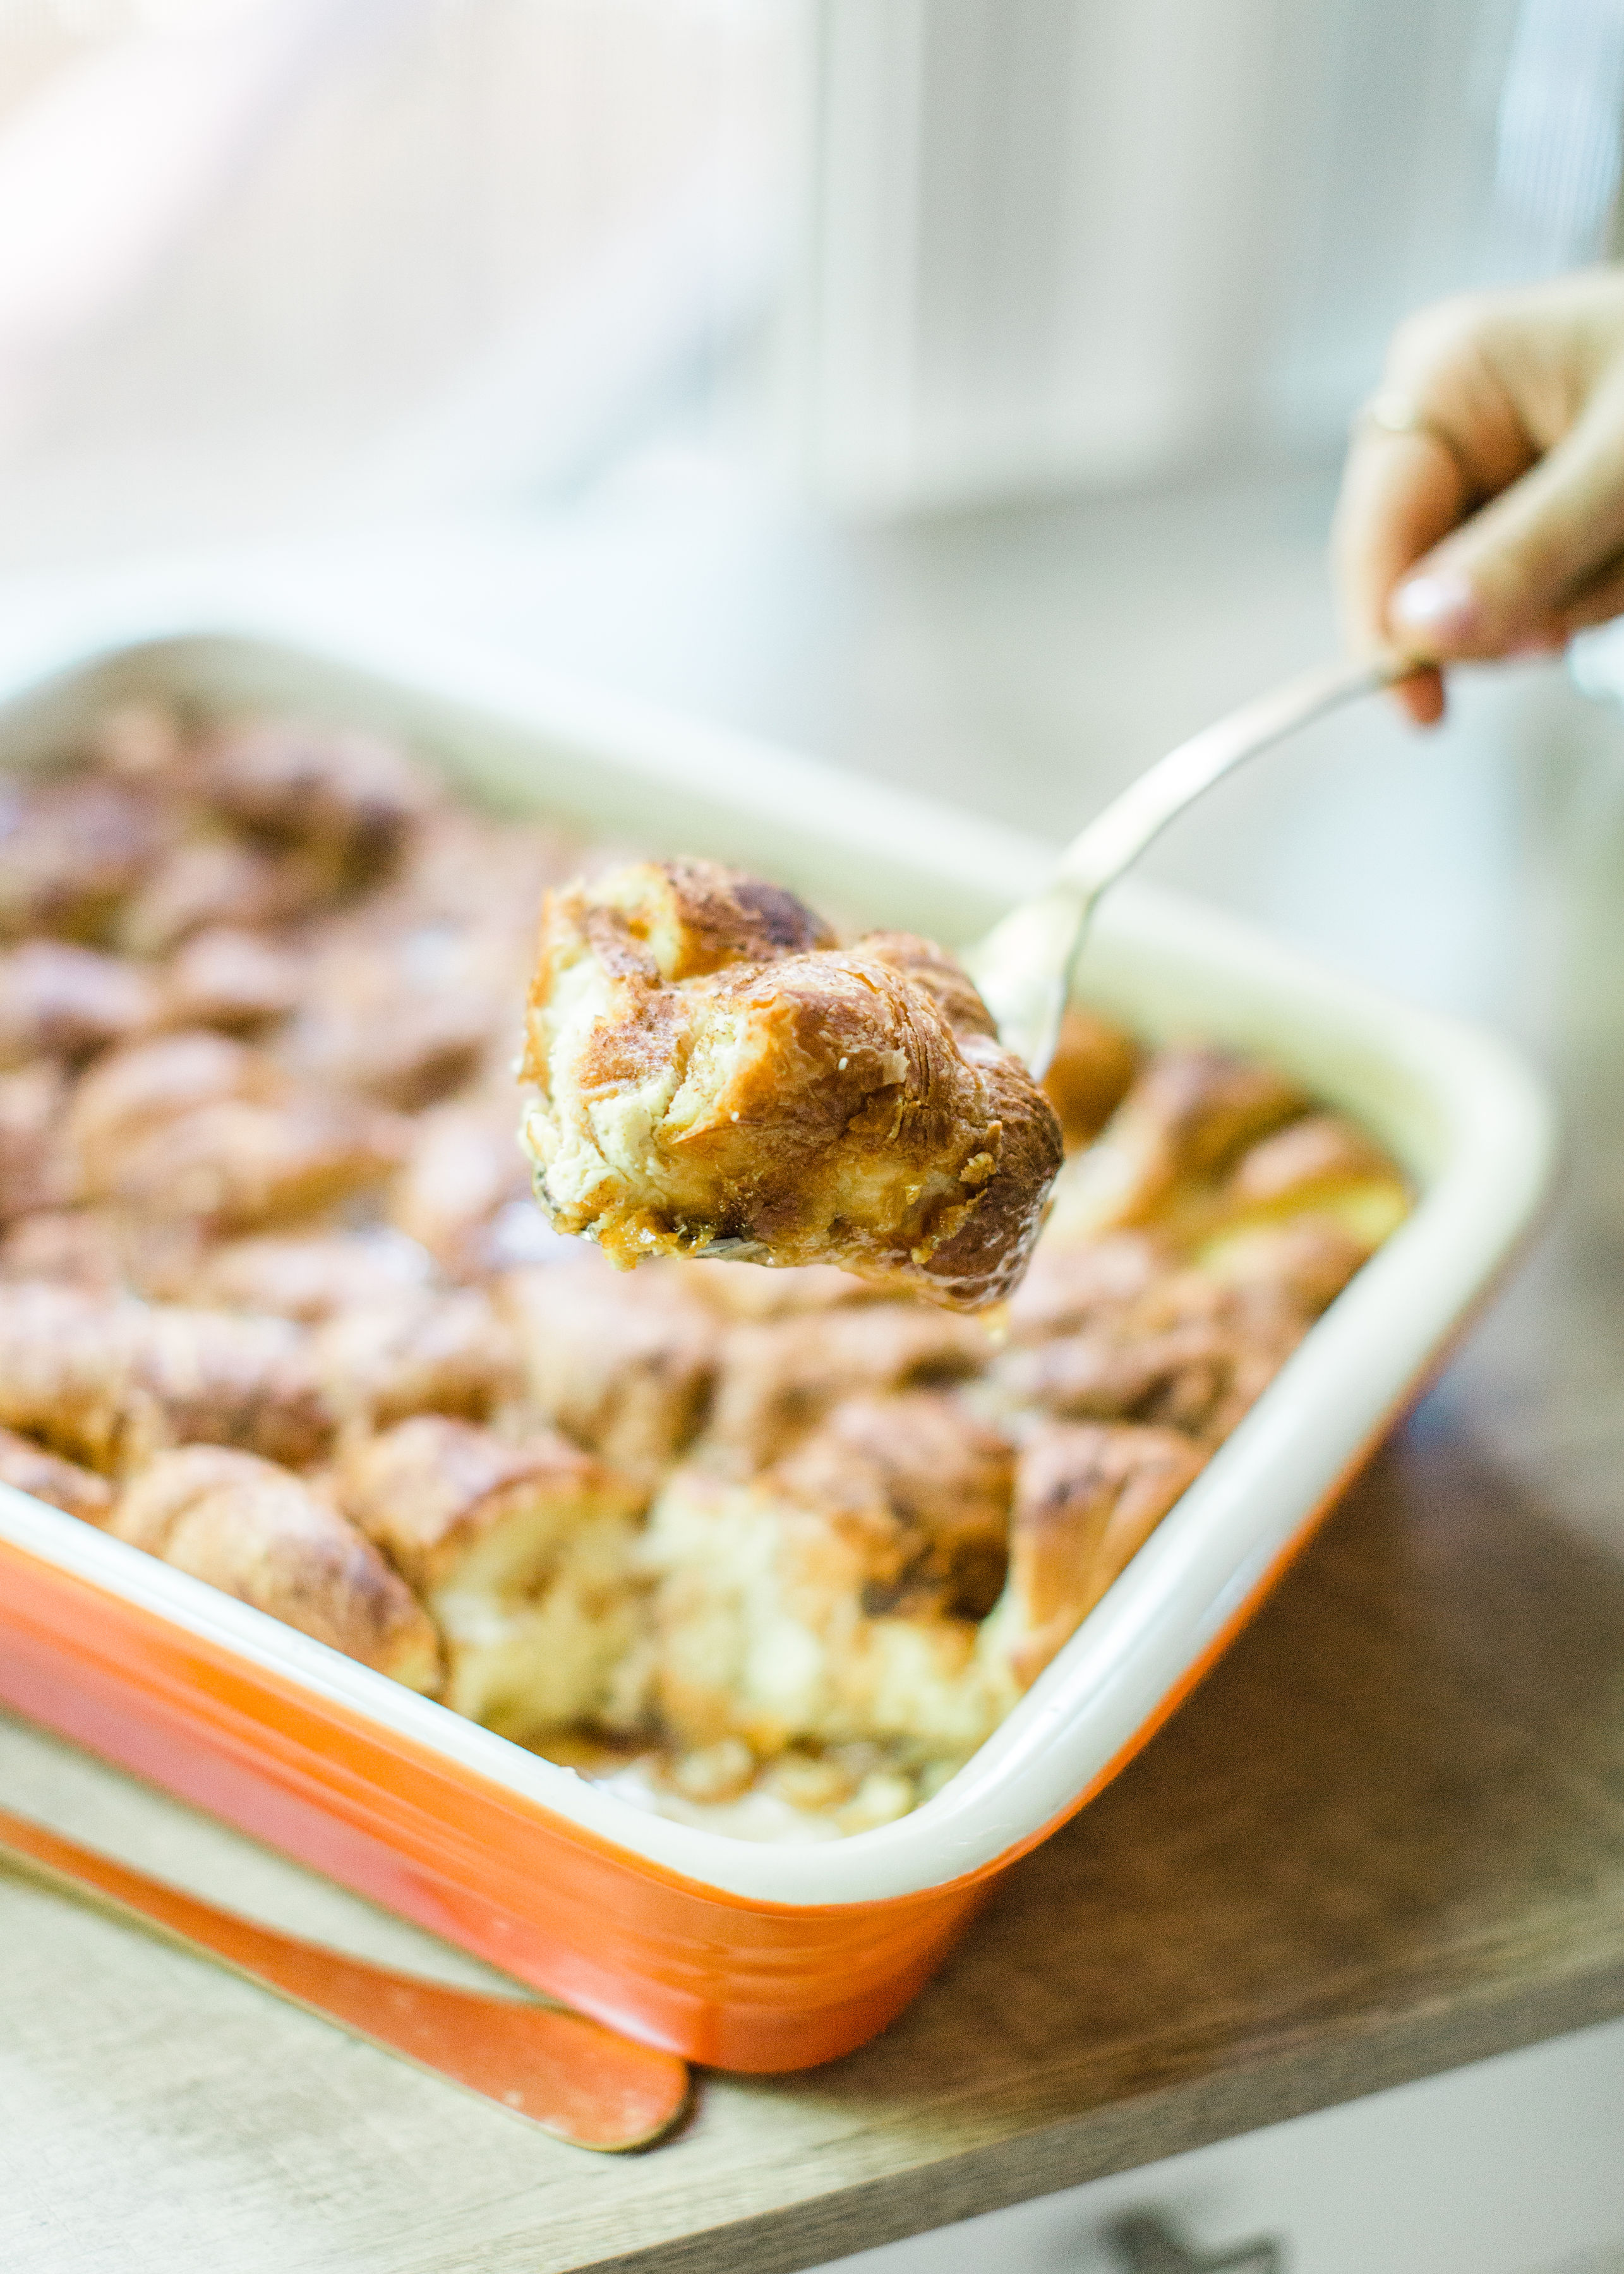 Look no further than this insanely amazing overnight crème brûlée french toast casserole. This decadent dessert has been a staple at our family brunches for years, and with this one special tweak, we've managed to make it even better. Read on for the details! Click through for the recipe. #cremebruleefrenchtoast #cremebruleefrenchtoastcasserole #brunch | glitterinc.com | @glitterinc